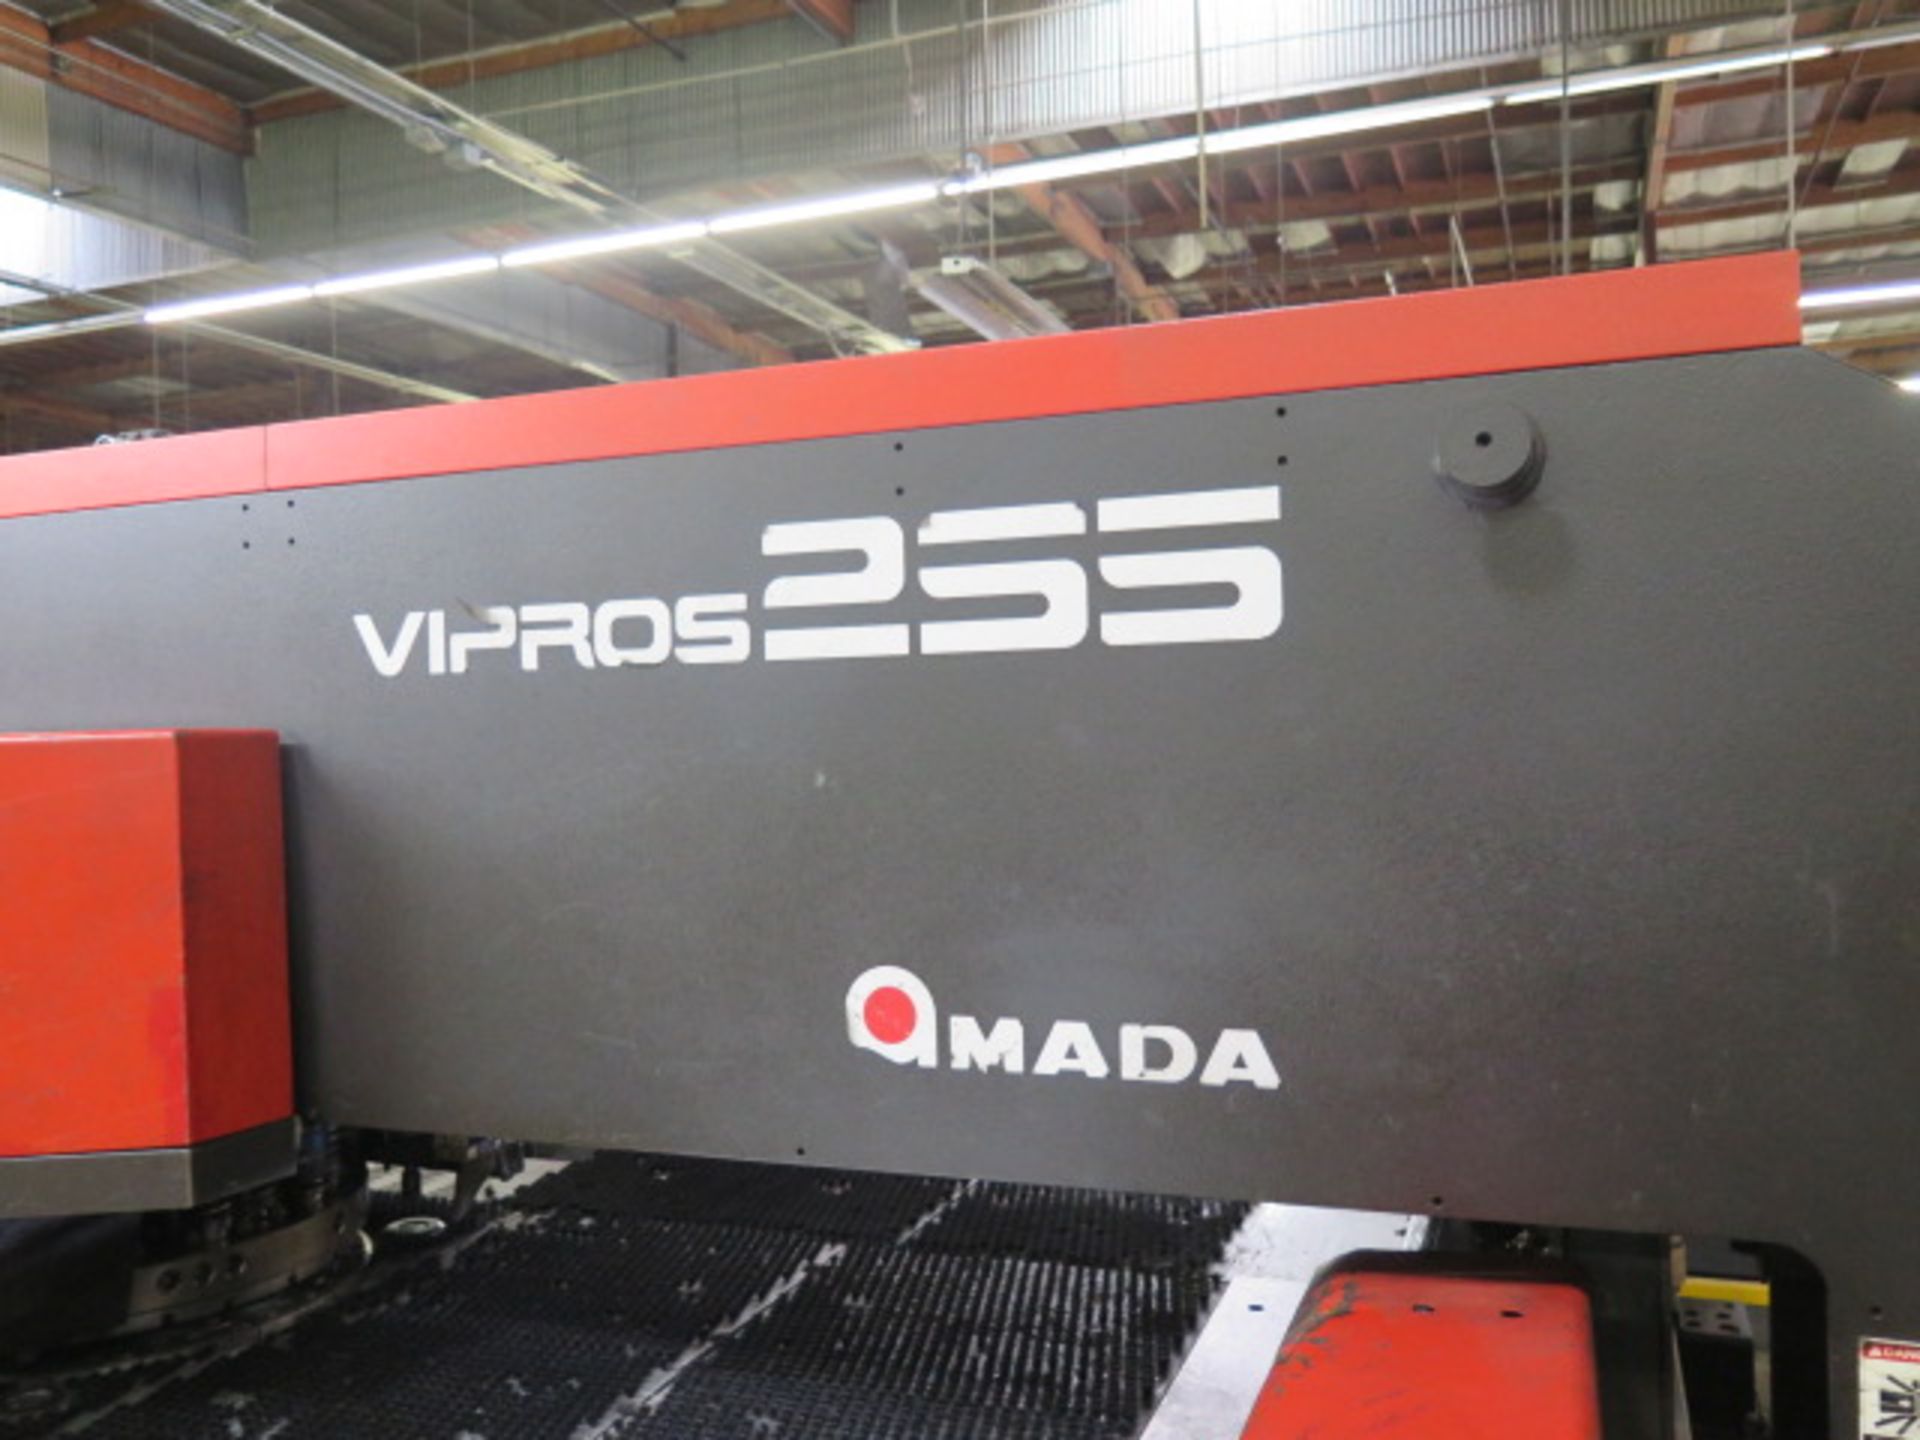 1997 Amada VIPROS 255 20 Ton 31-Station CNC Turret Press s/n AVP55079 w/ Fanuc 18-P Con, SOLD AS IS - Image 13 of 27